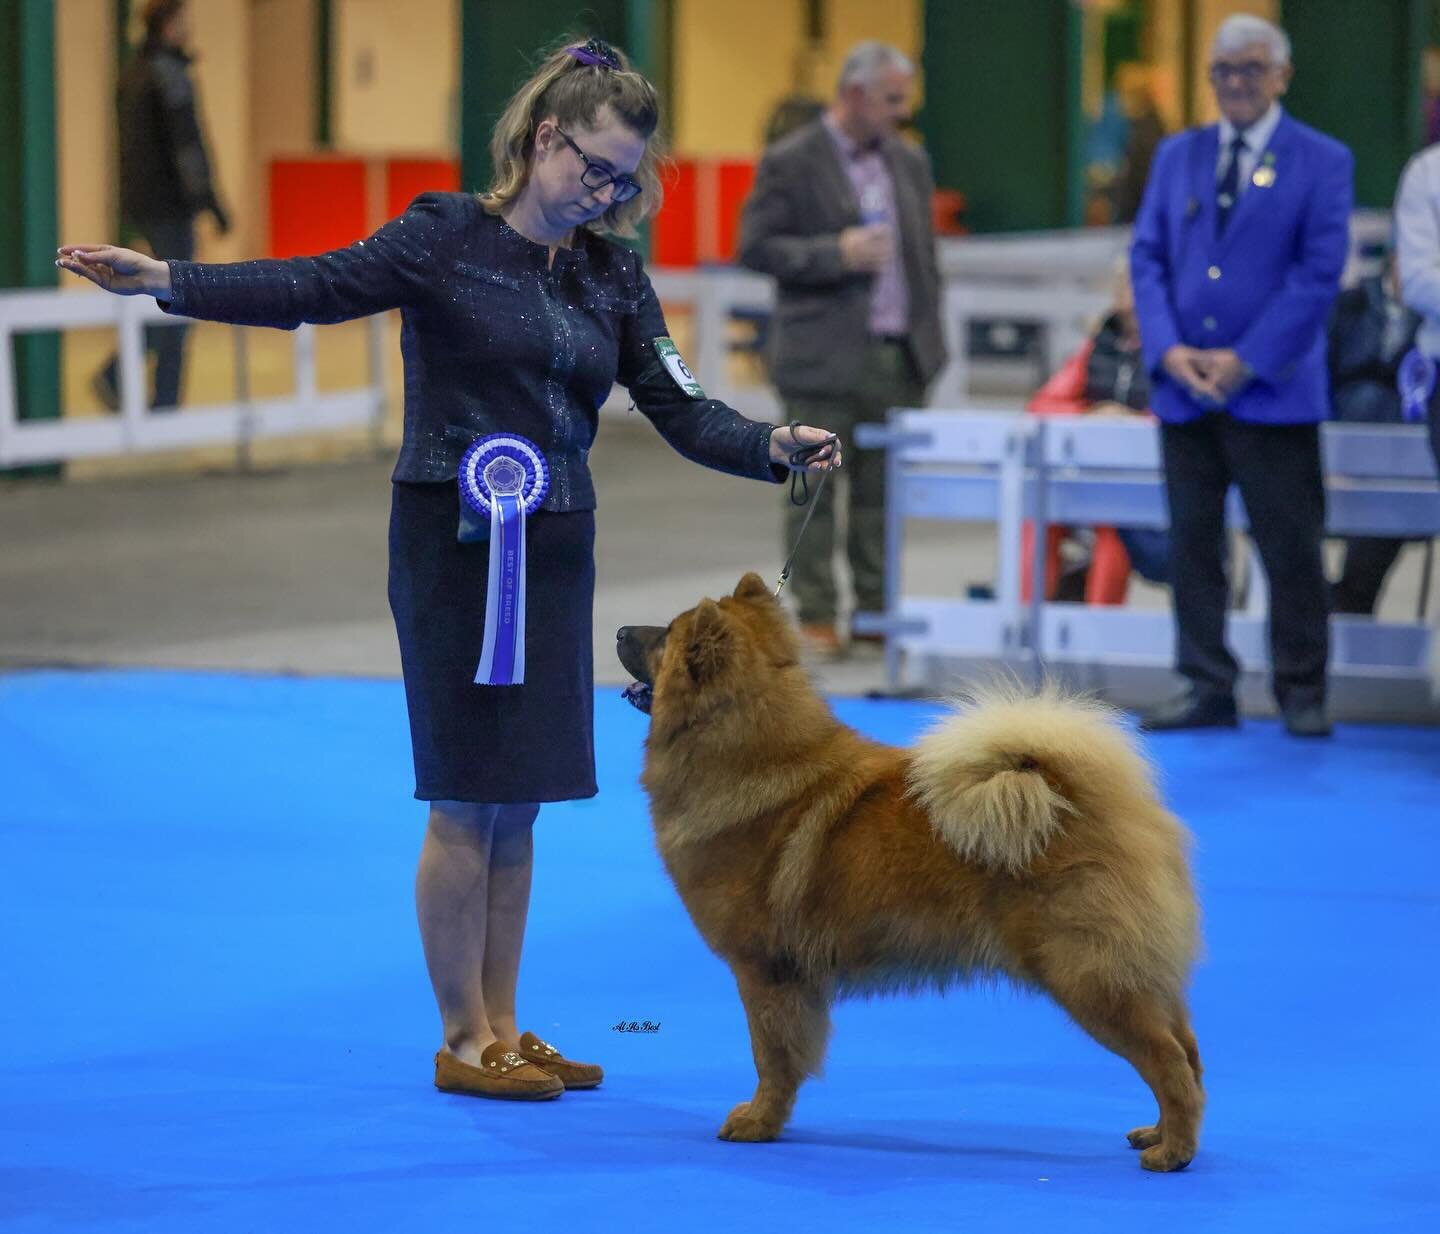 This dog! He is one in a million 🥰

Titan won his 15th Best of Breed on Sunday at Midland Counties Ch Show and later shortlisted to the final 7 in the Utility Group. Thank you to judges Gavin Robertson and Steve Hall for appreciating our boy. At 16 